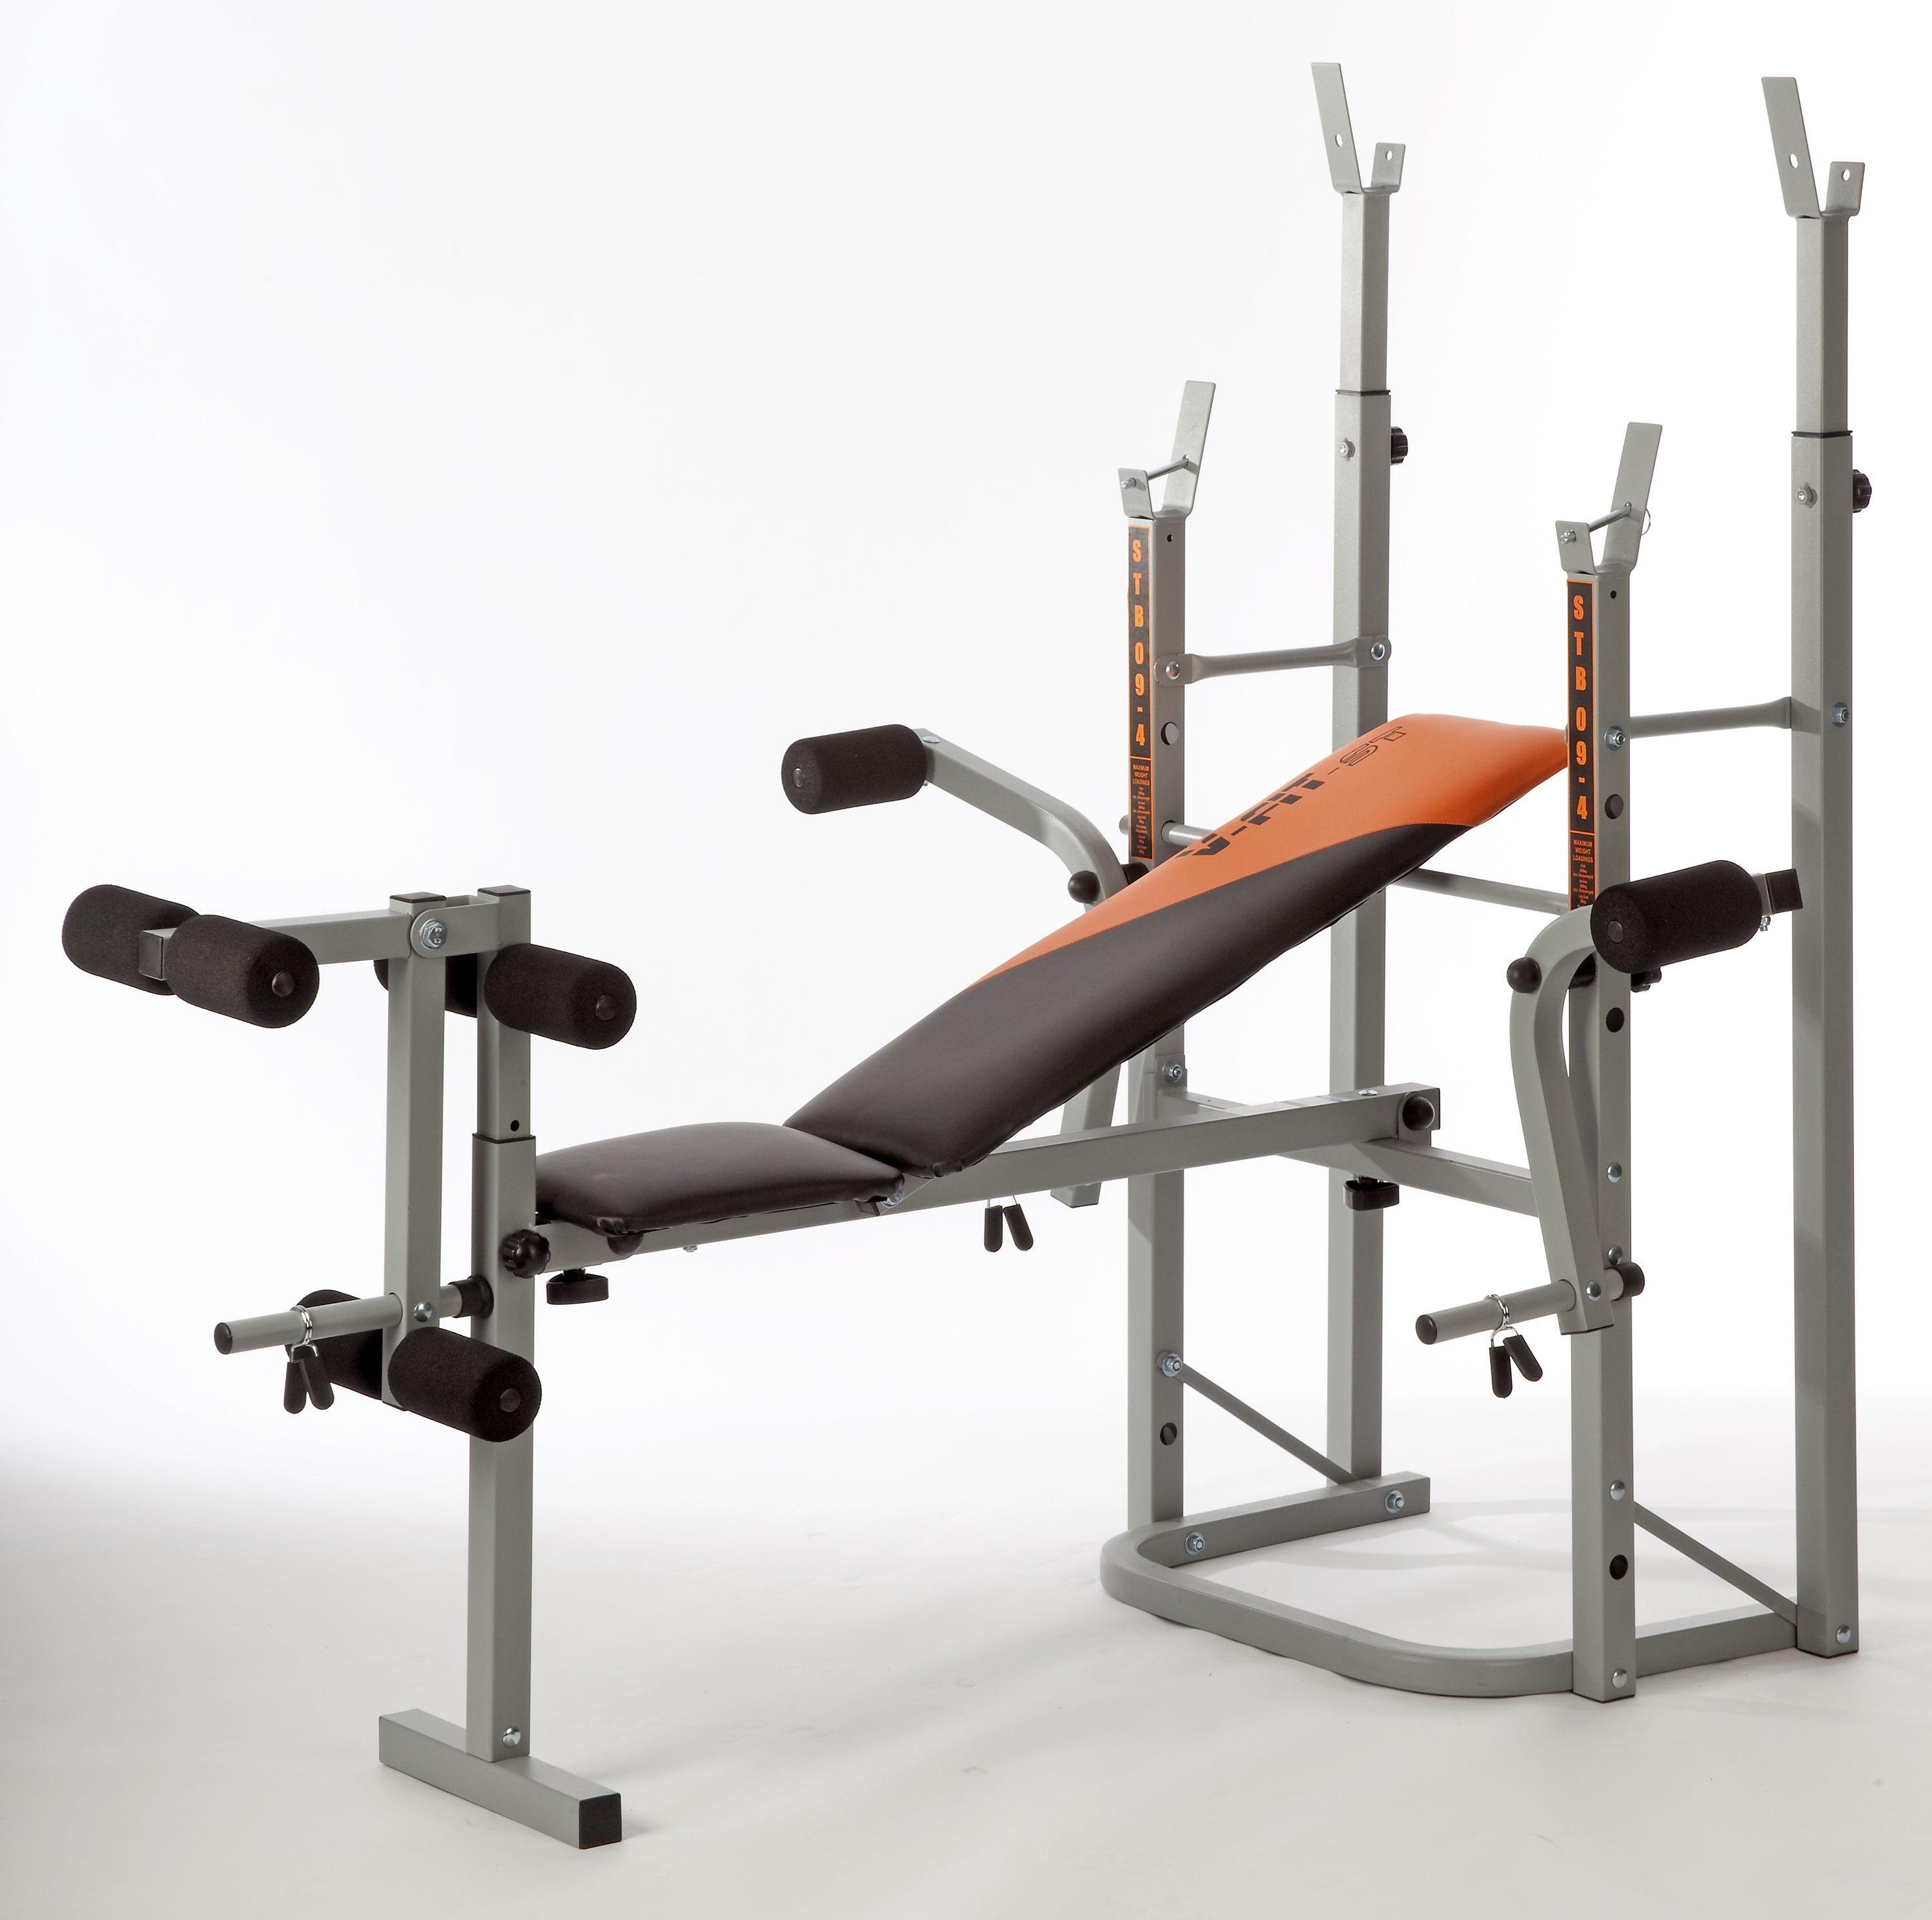 V-Fit Herculean STB 09-4 Folding Workout Bench